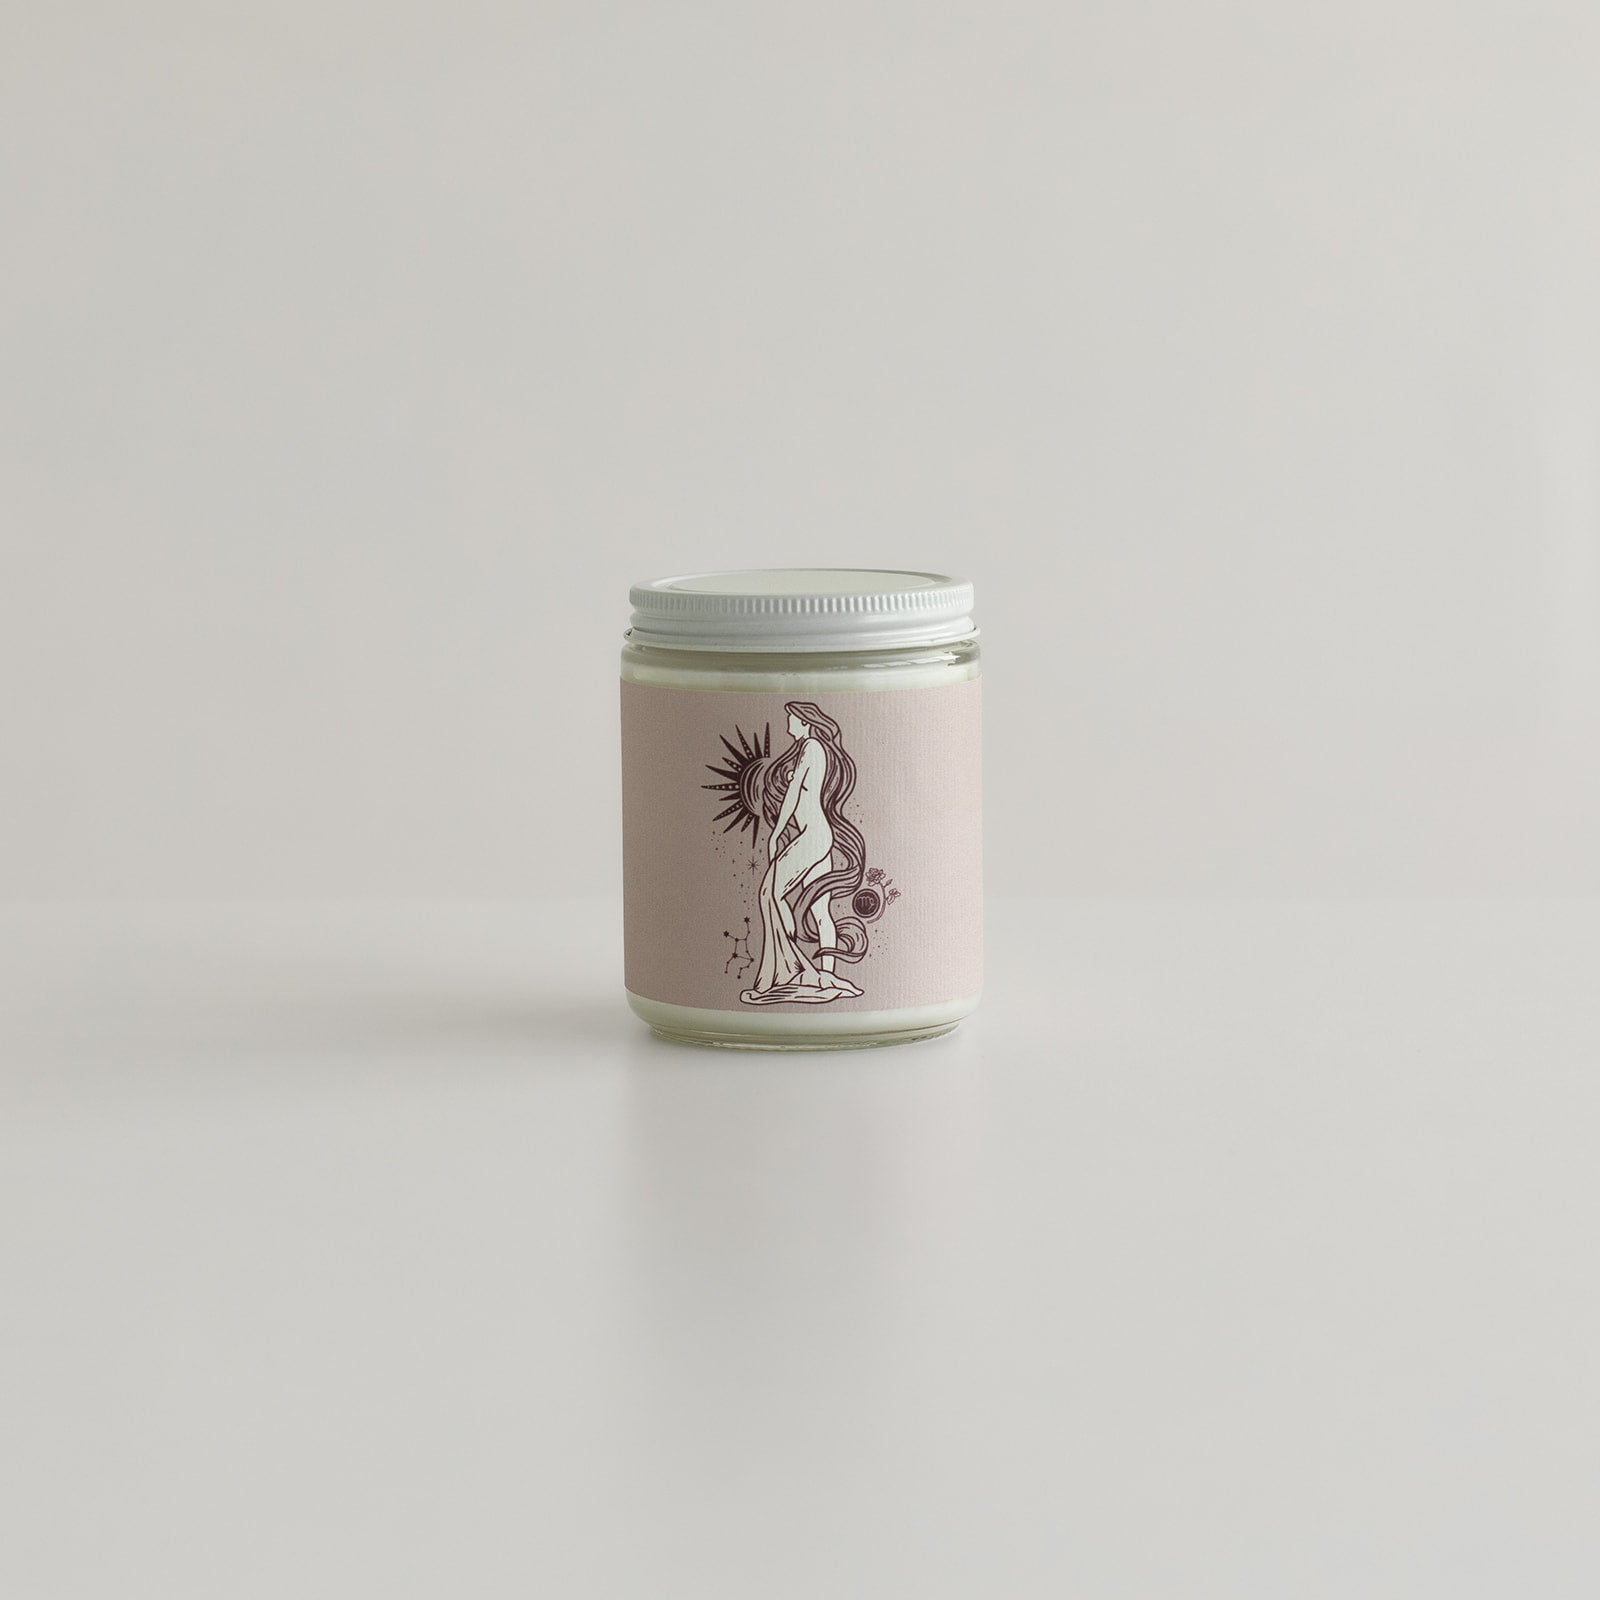 hand poured nontoxic soy wax candle in a jar with virgo astrology zodiac symbol